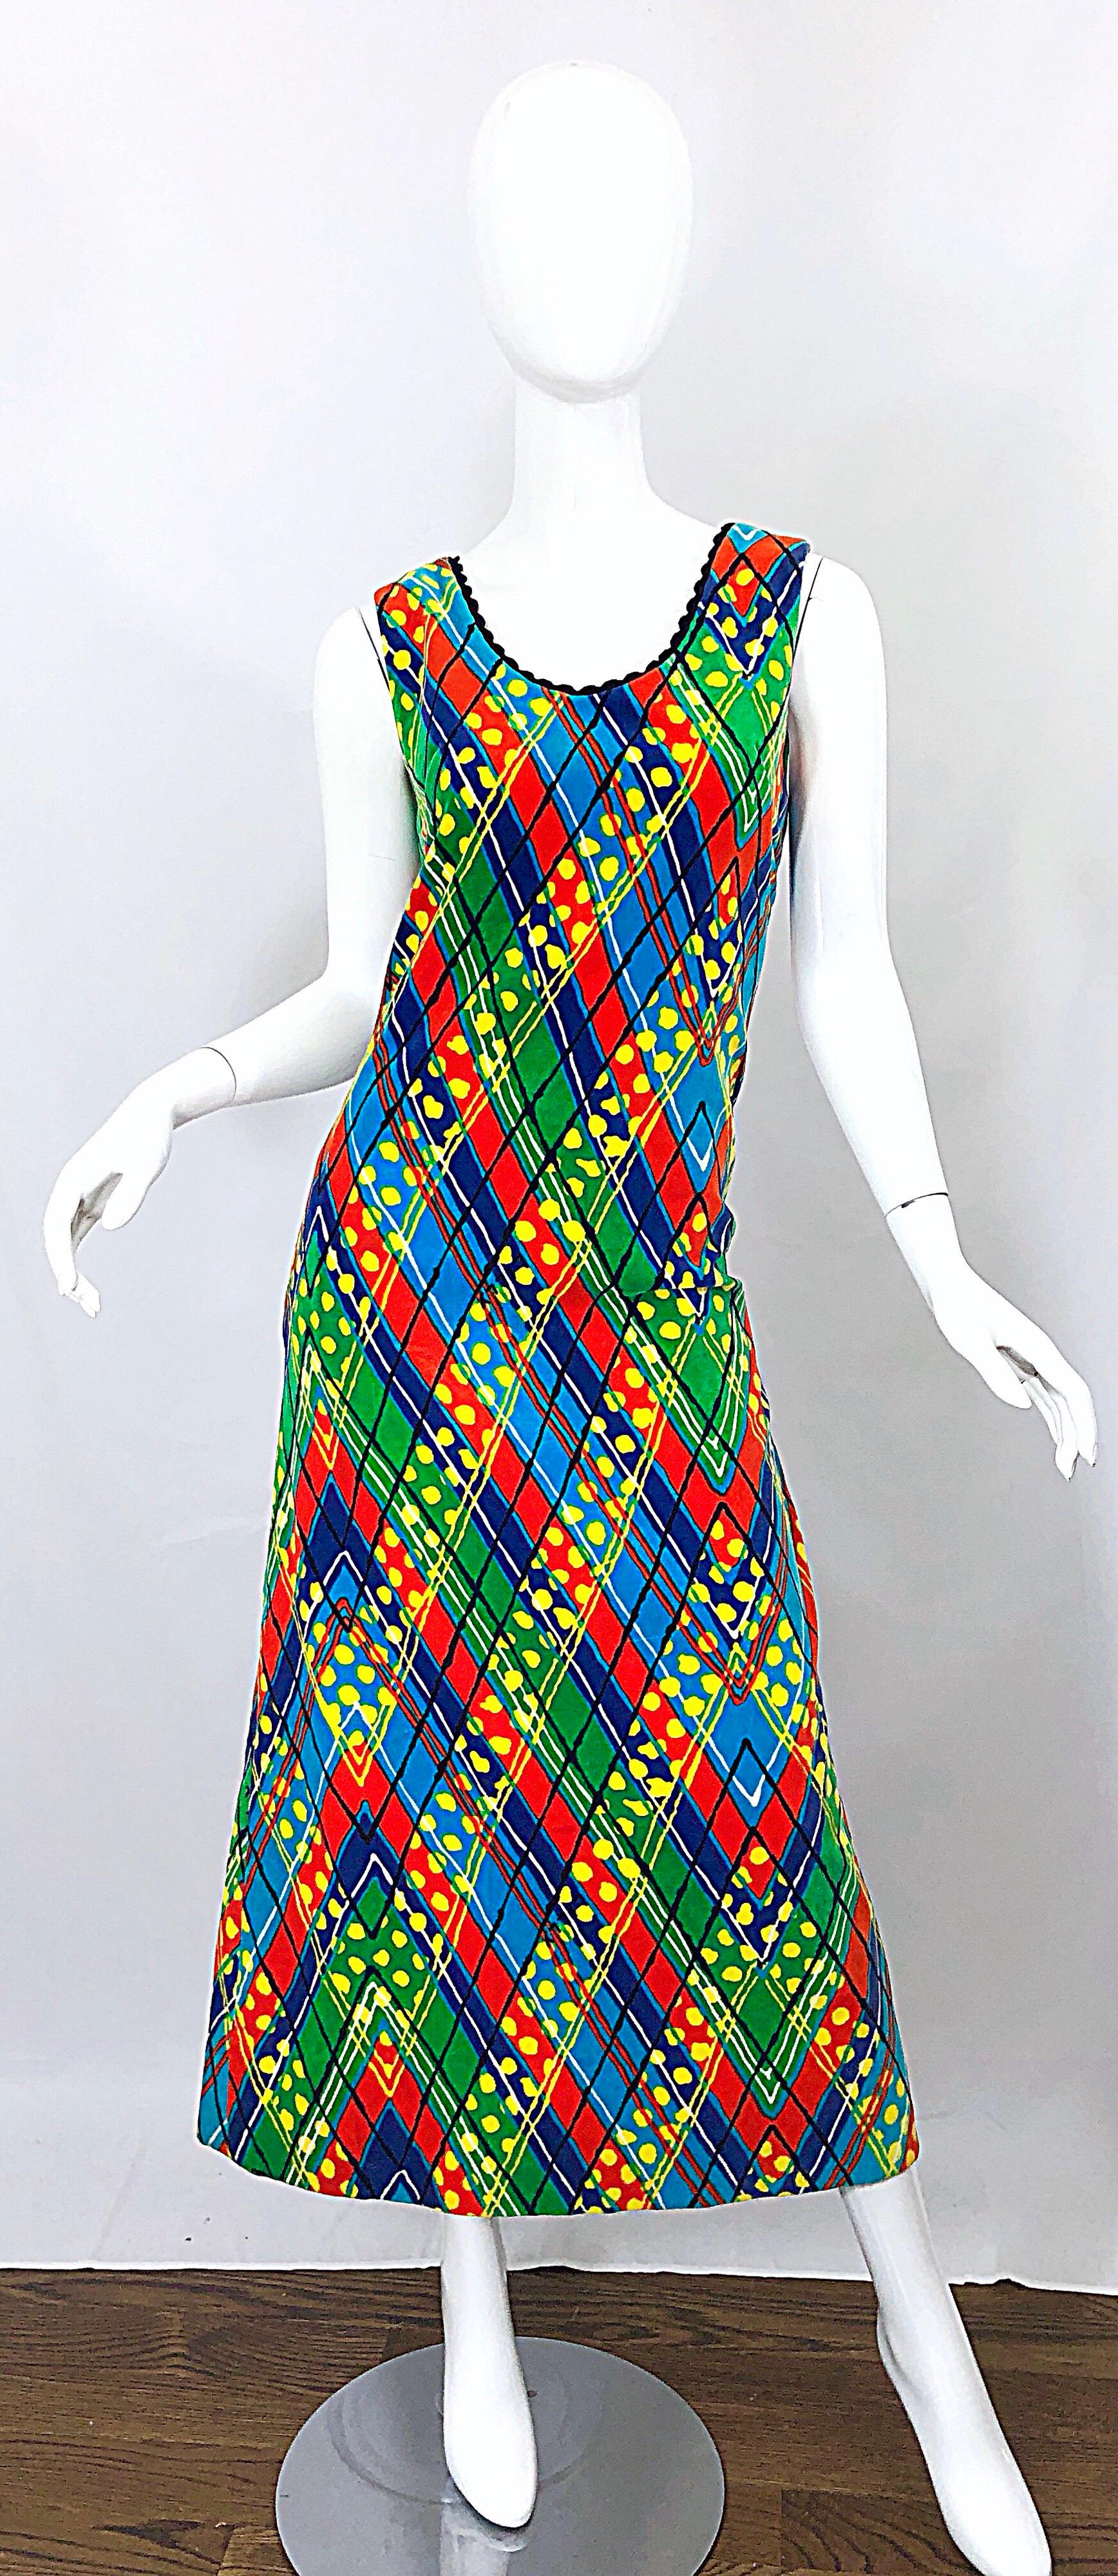 Chic and rare 60s LILLY PULITZER colorful op-art print cotton velvet maxi dress! Features chevron prints in vibrant colors of blues, green and orange. Contrasting thin stripes in black, orange, white and blue. And, to top it all off, there are